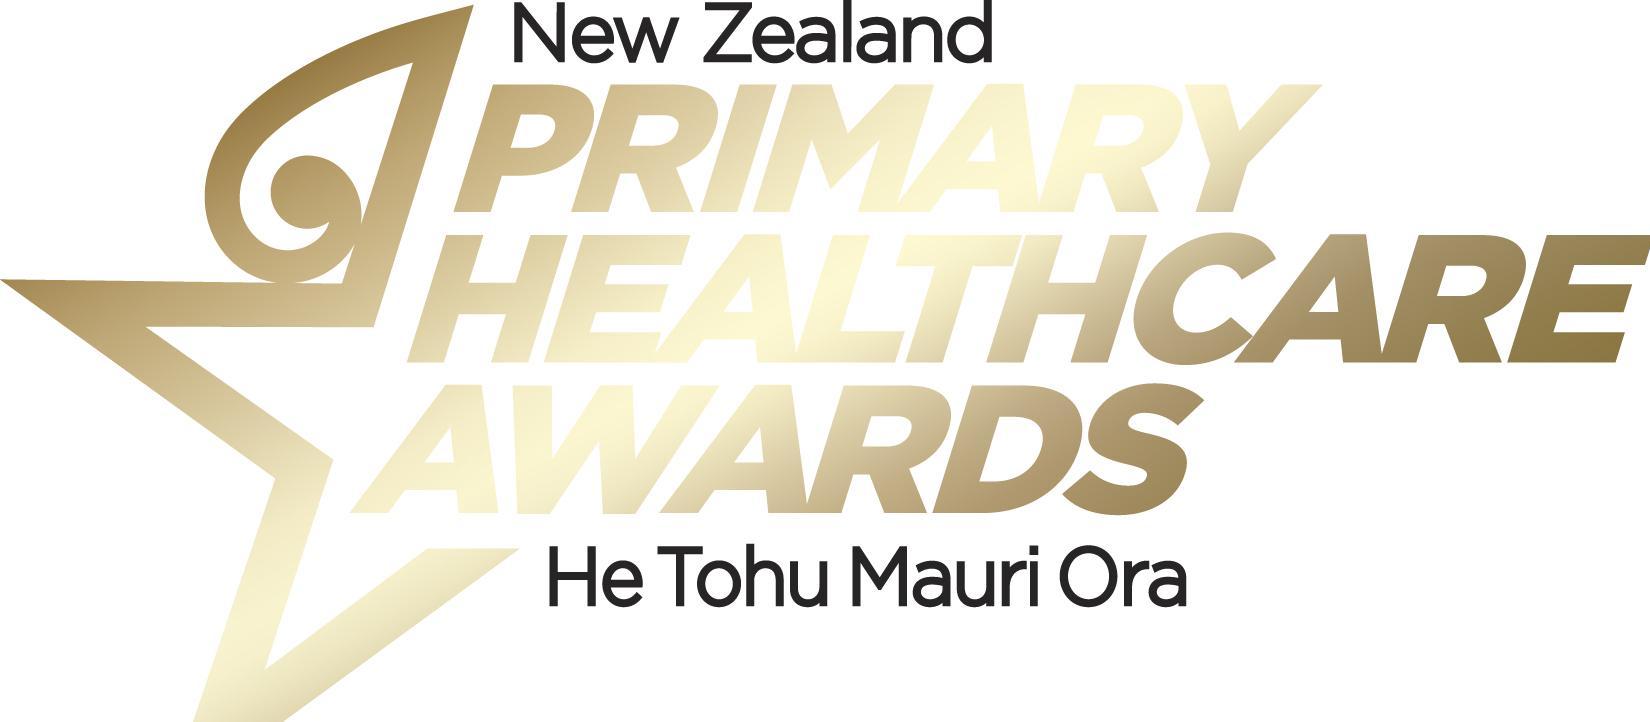 The countdown is on for the inaugural New Zealand Primary Healthcare Awards | He Tohu Mauri Ora